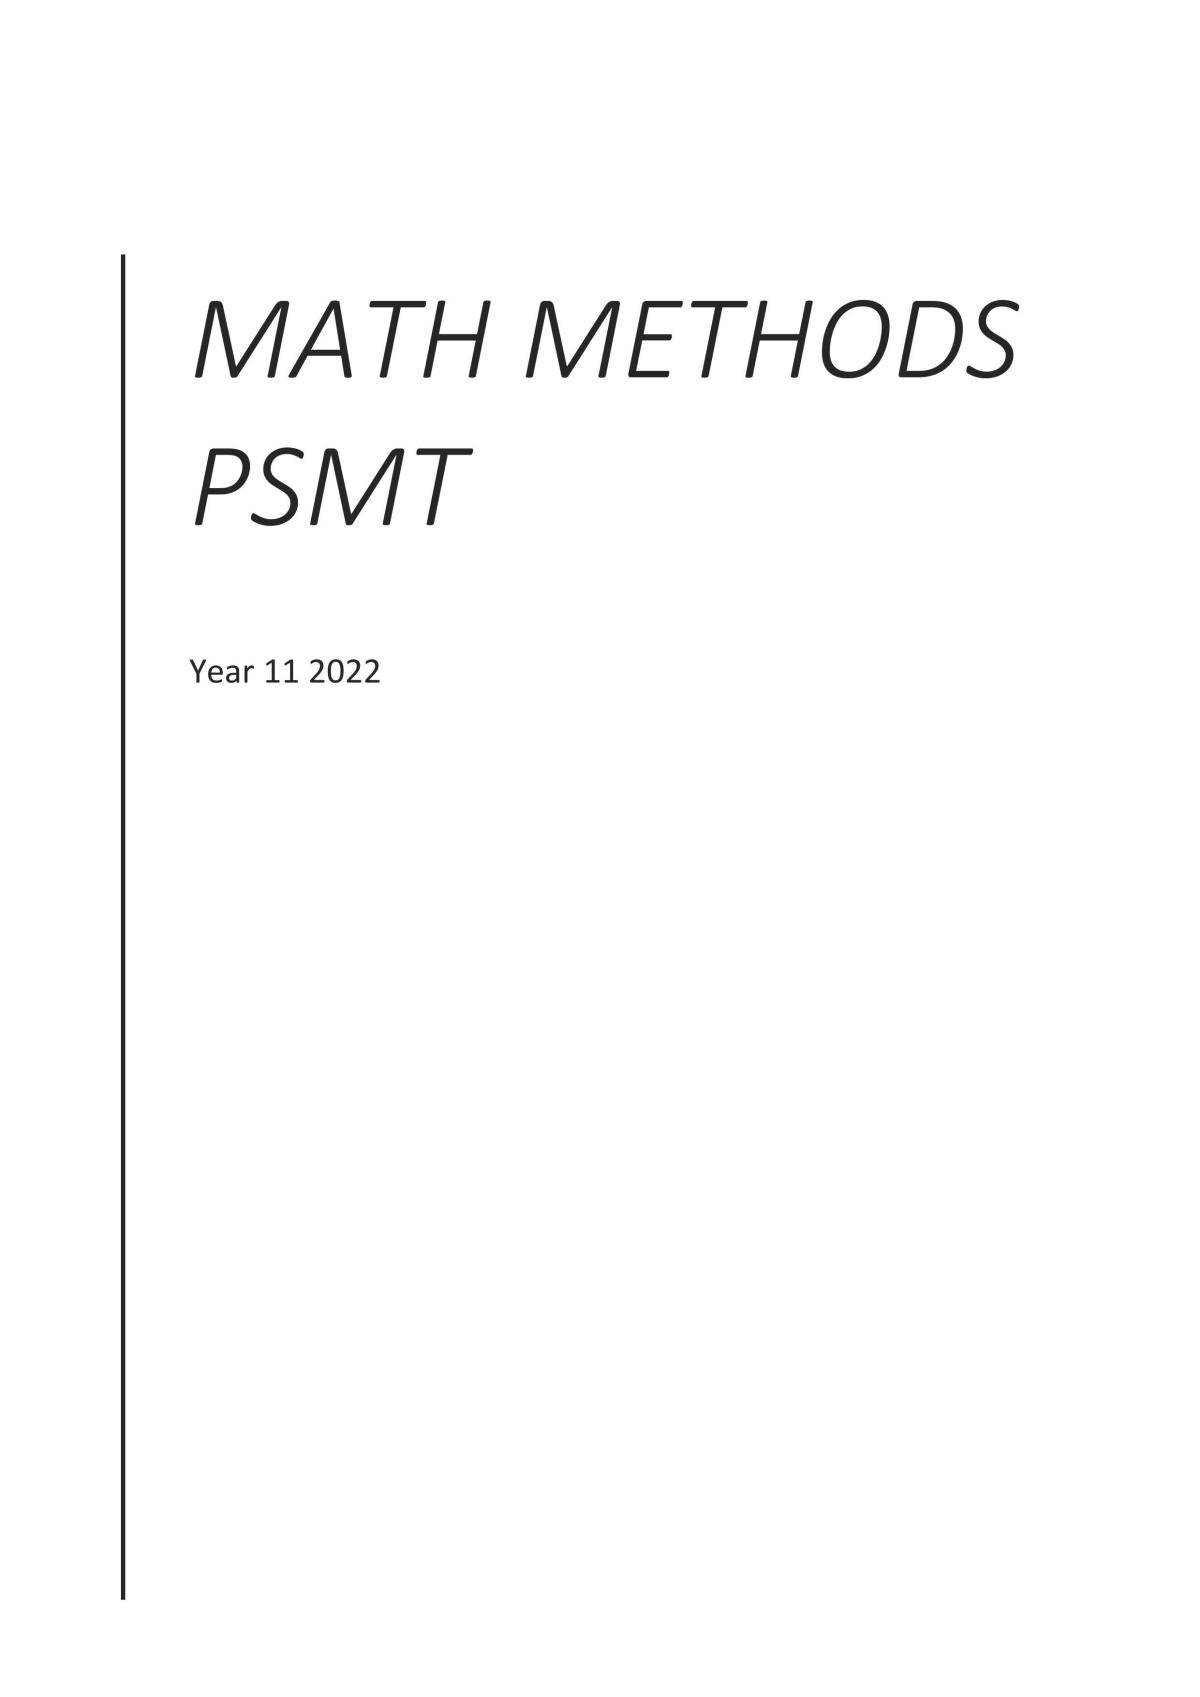 A Mathe Methods PSMT on how gravity affects a chain to make a catenary curve and how lines can be modeled to the curve. - Page 1